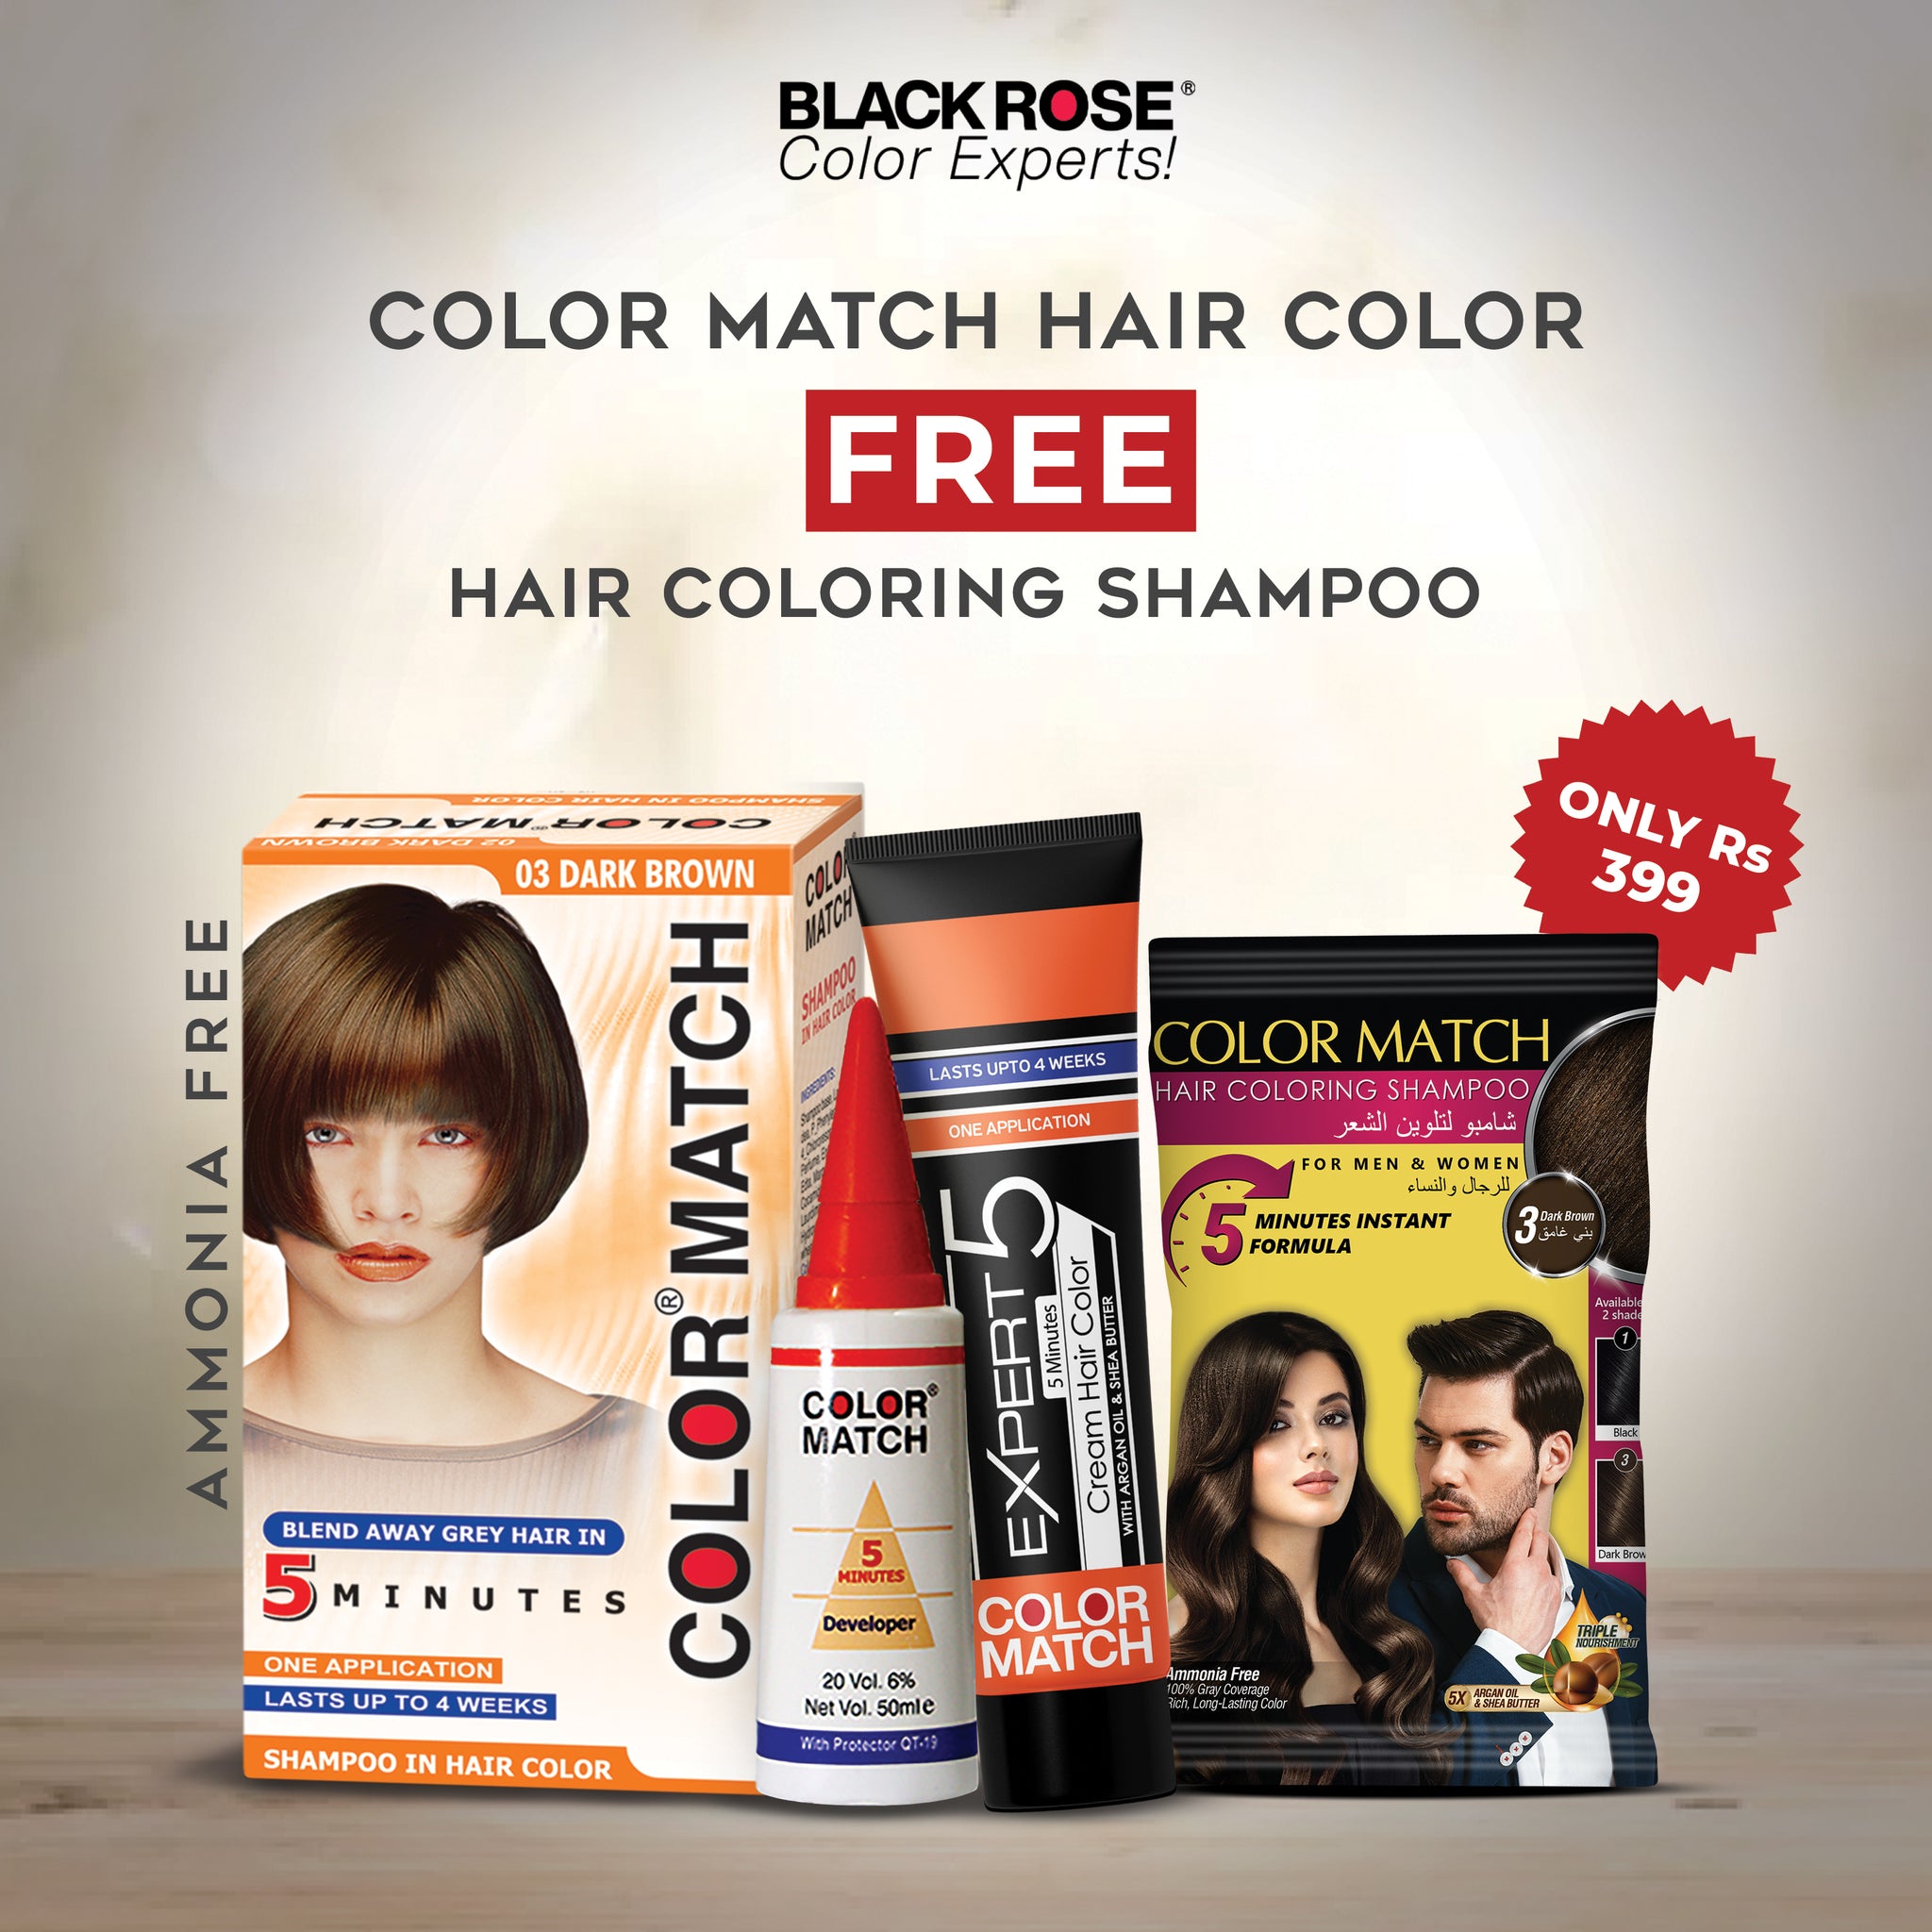 Color Match Hair Color With Free Hair Coloring Shampoo